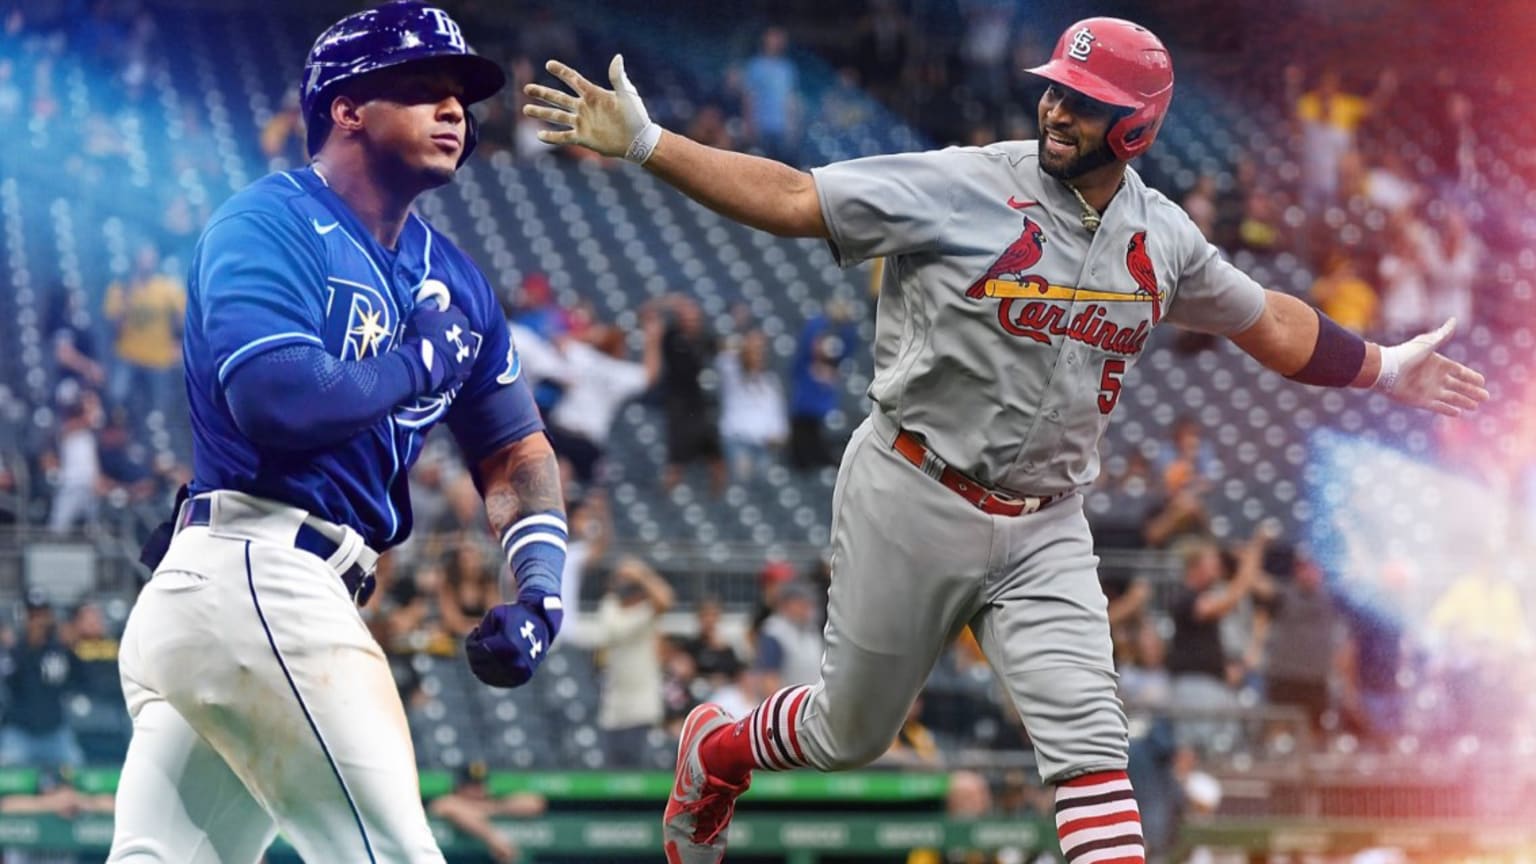 A composite image showing Wander Franco pounding his chest on the left and Albert Pujols spreading his arms wide and smiling after hitting a homer on the right